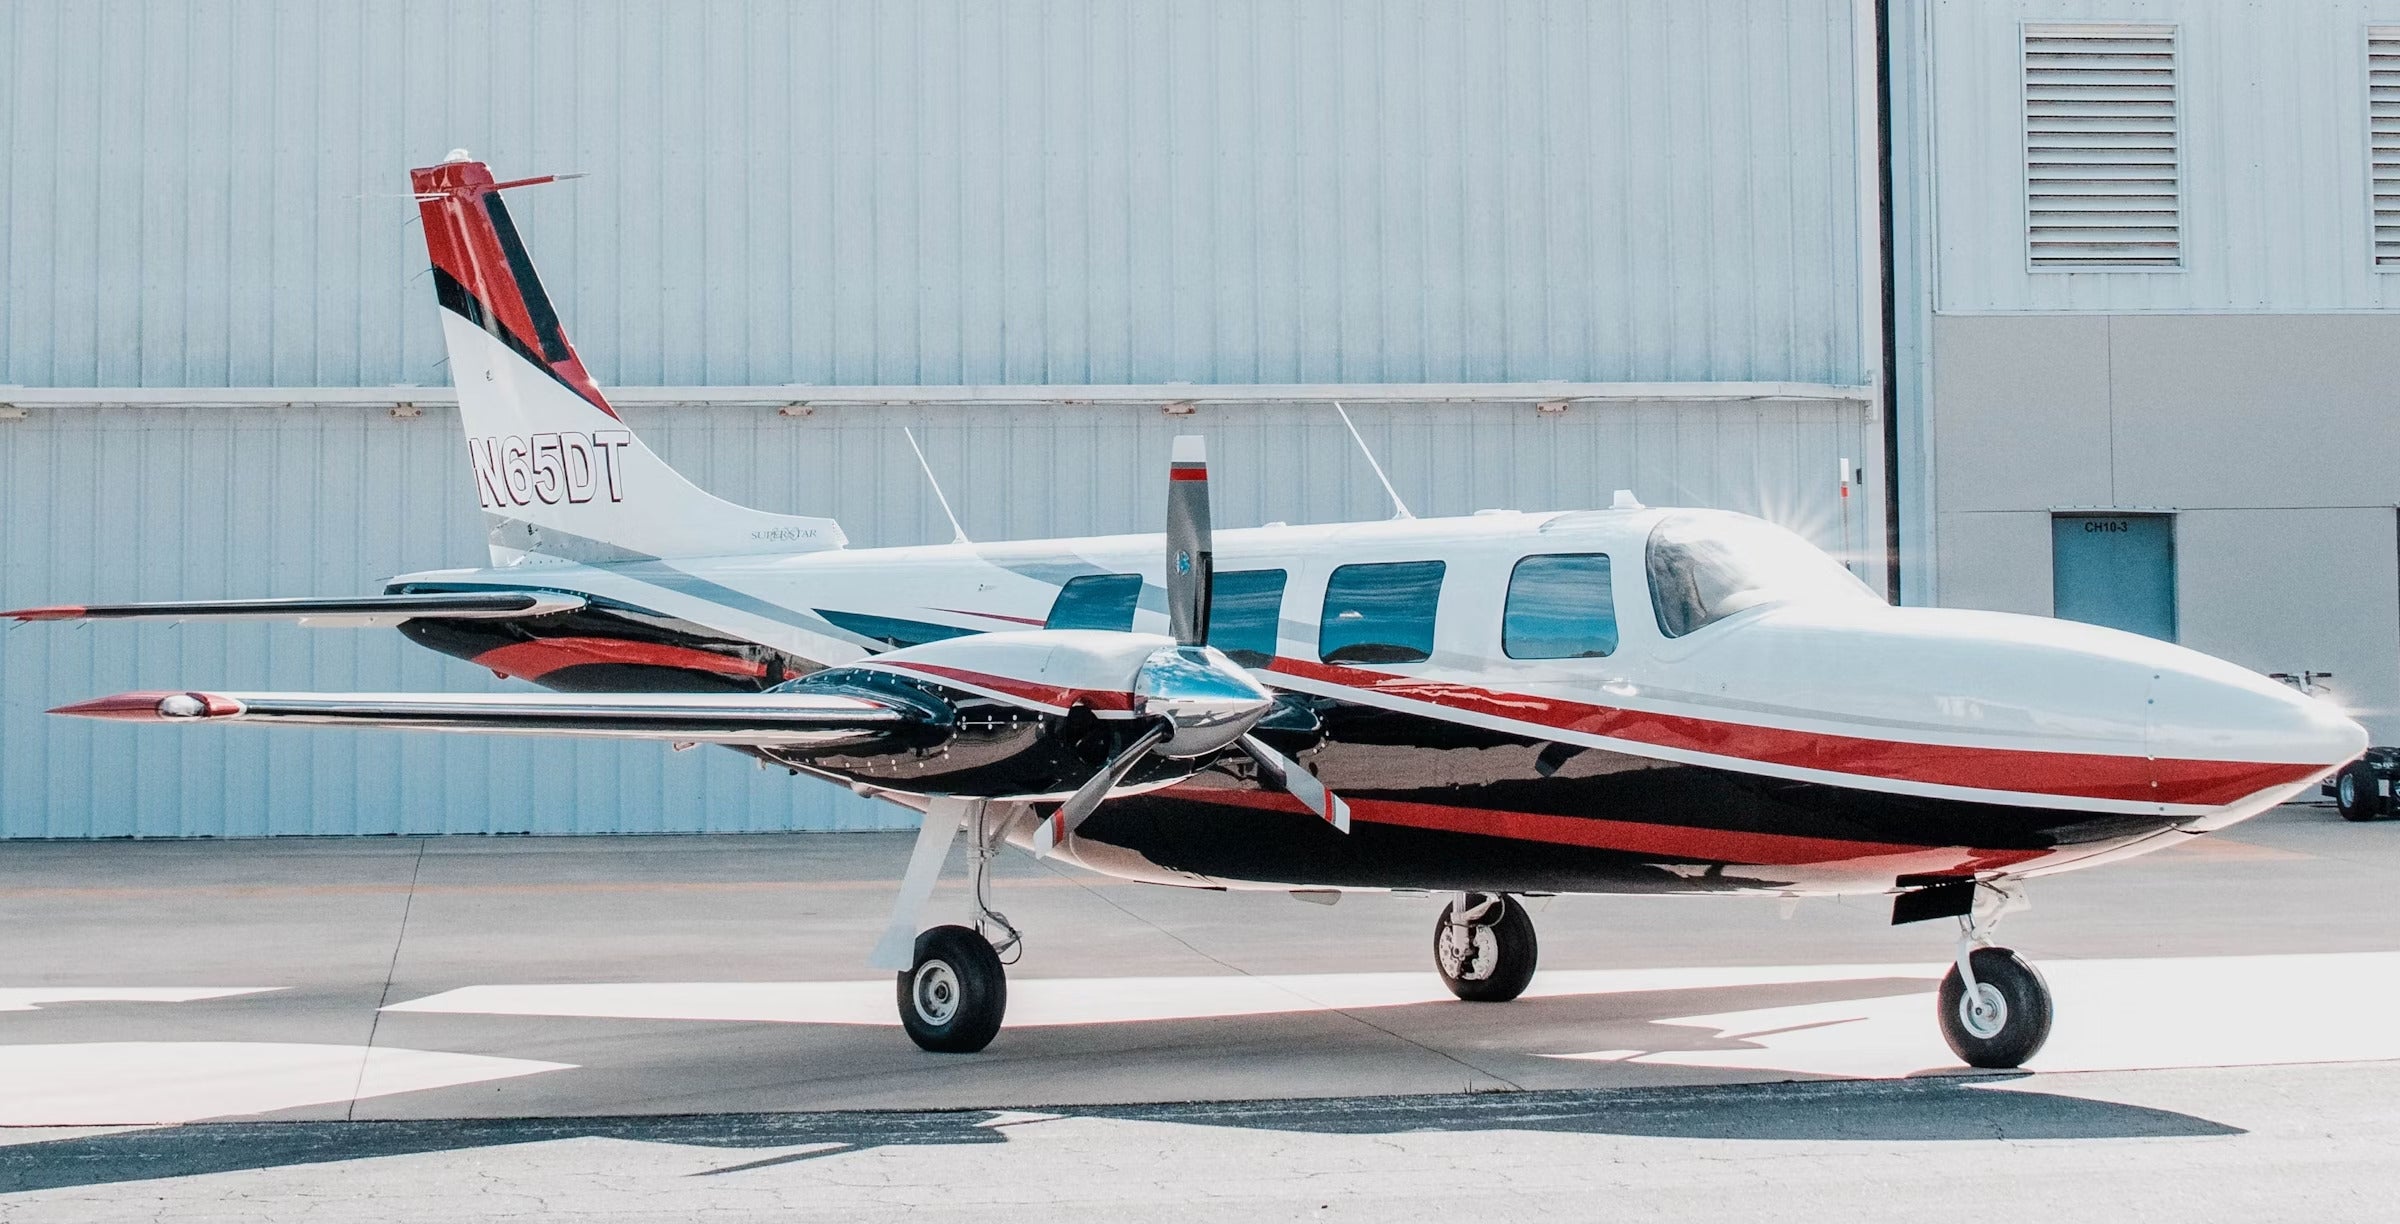 This 1979 Piper Aerostar Is a Top-Tier Piston Twin and an ‘AircraftForSale’ Top Pick